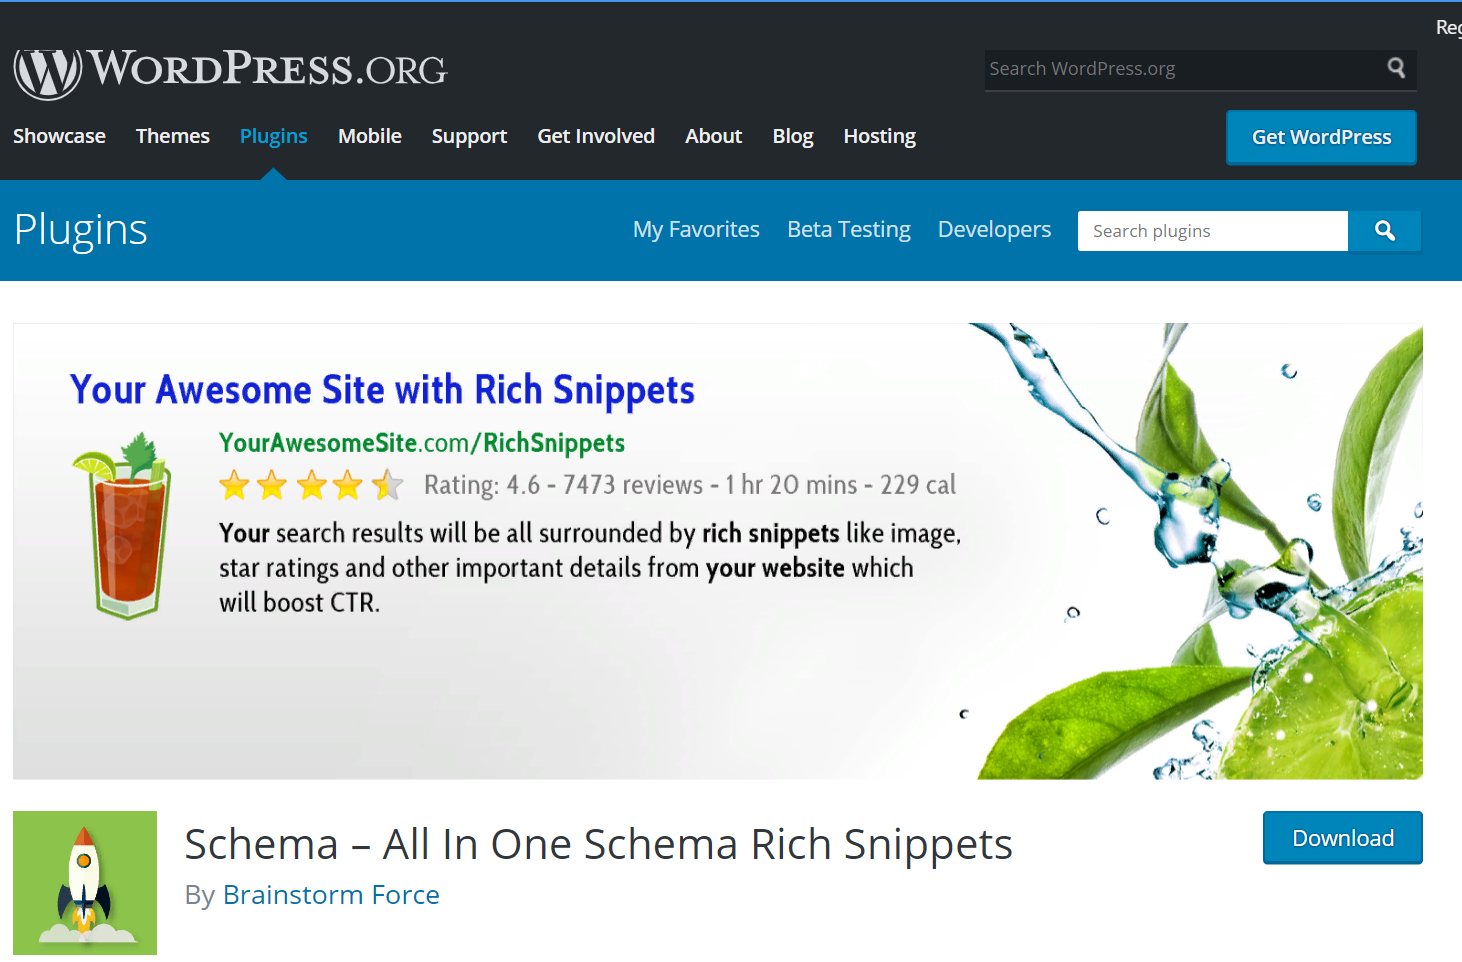   All In One Schema Rich Snippets